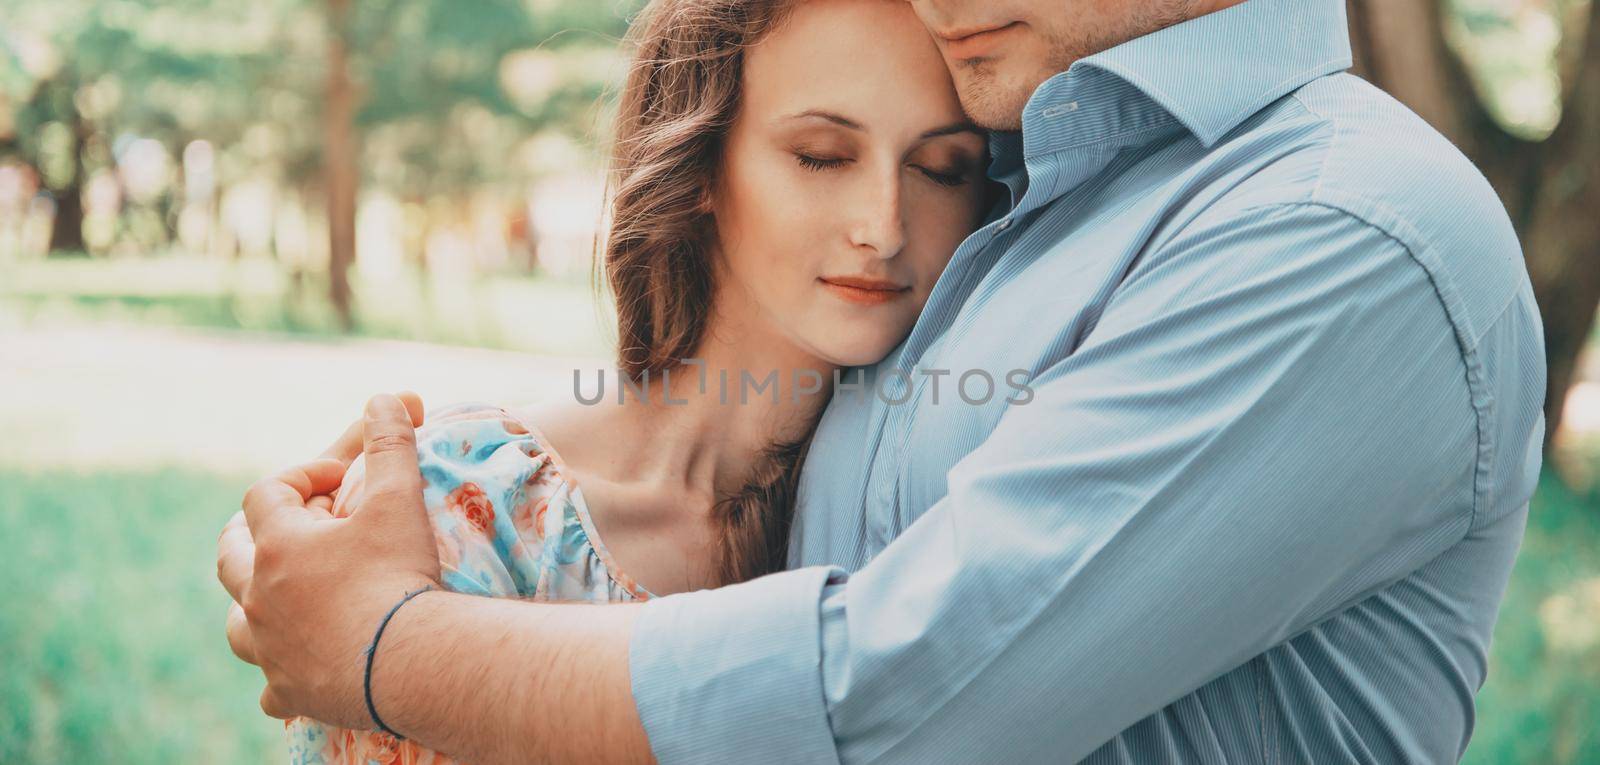 Young couple in love resting in summer park. Man embracing woman with closed eyes, tender scene